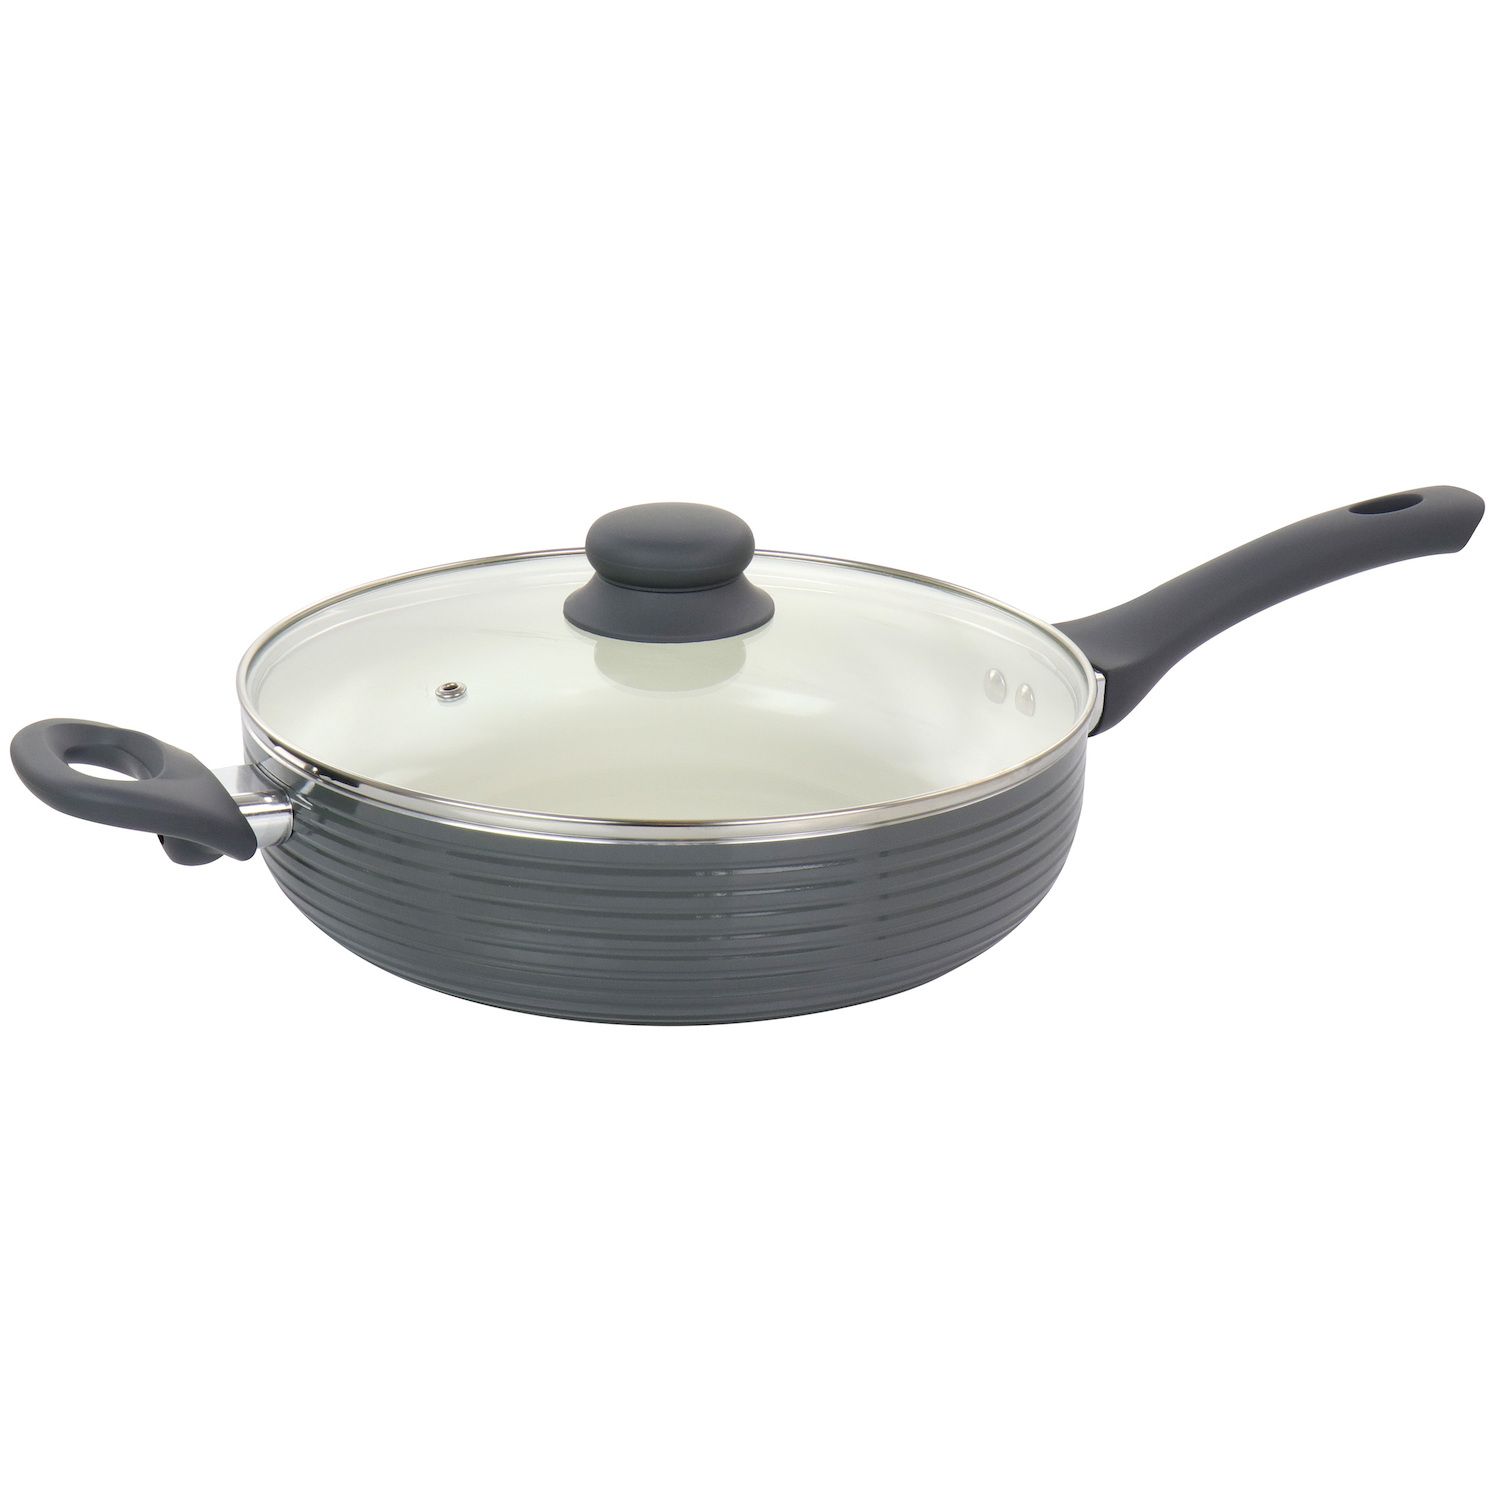 GreenPan Chatham Healthy Ceramic Nonstick 3.75 qt. Saute Pan with Lid